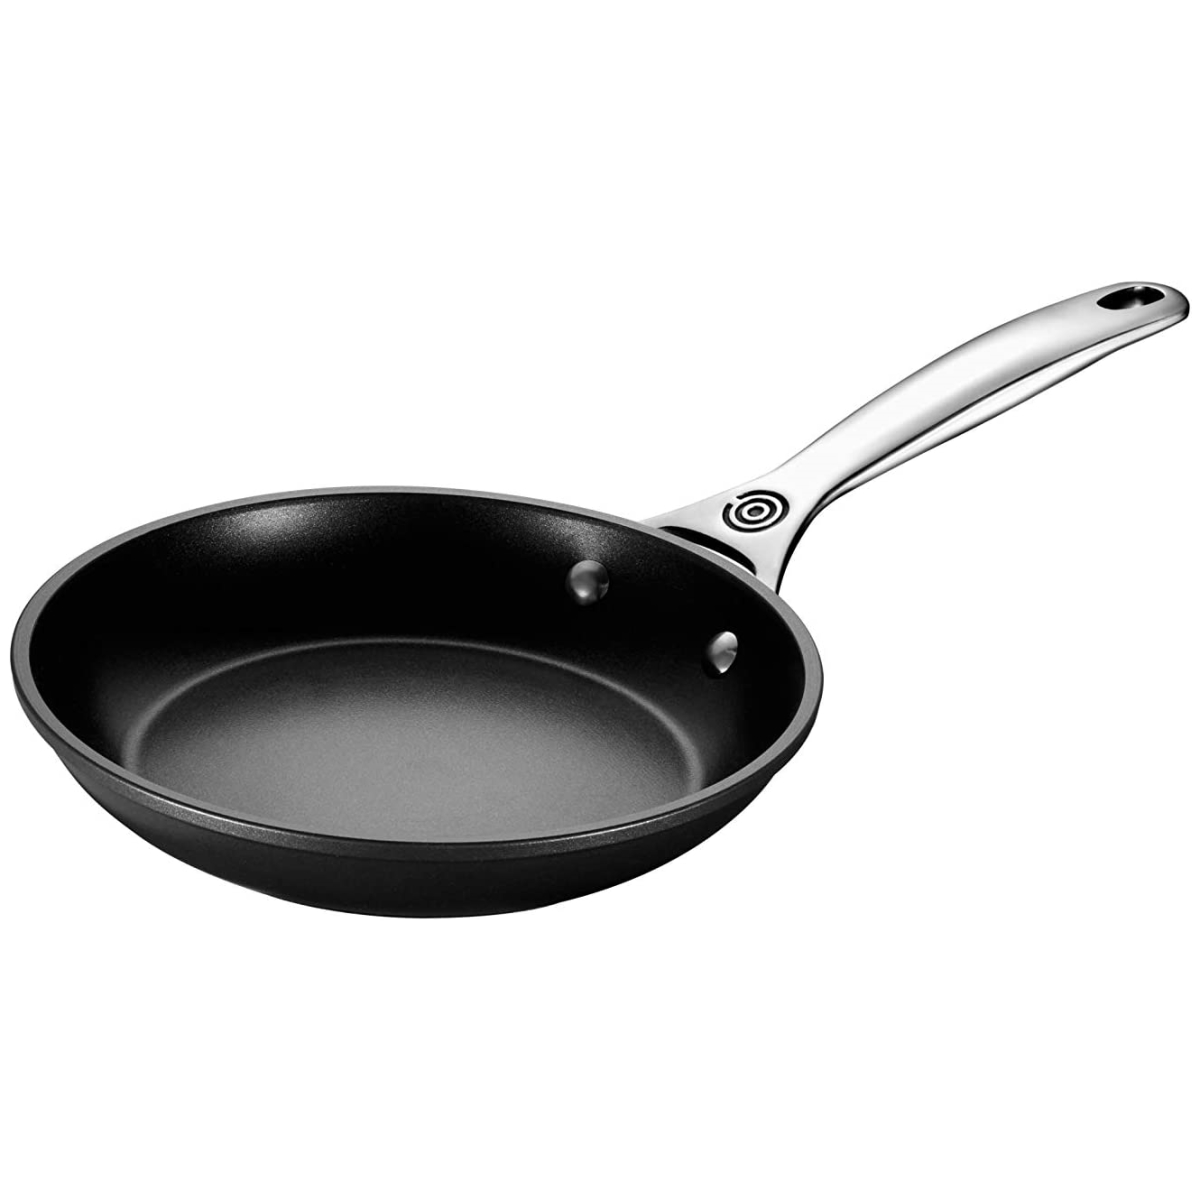 Zwilling Energy Nonstick Cookware Review - Consumer Reports